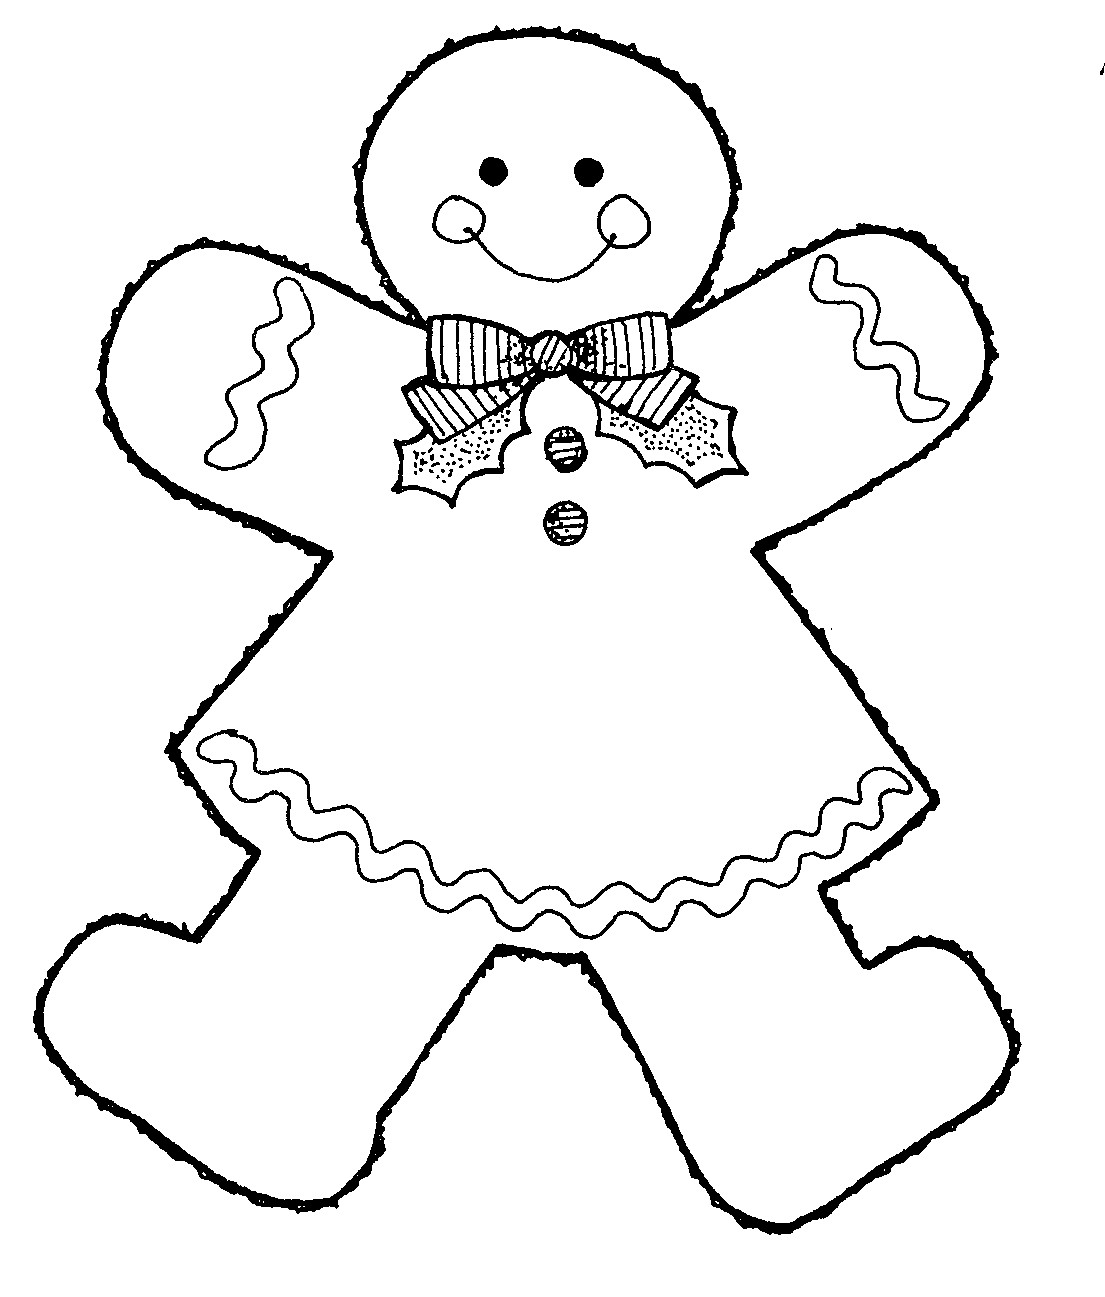 Candy House Coloring Pages For Boys
 Gingerbread House Clip Art Cliparts